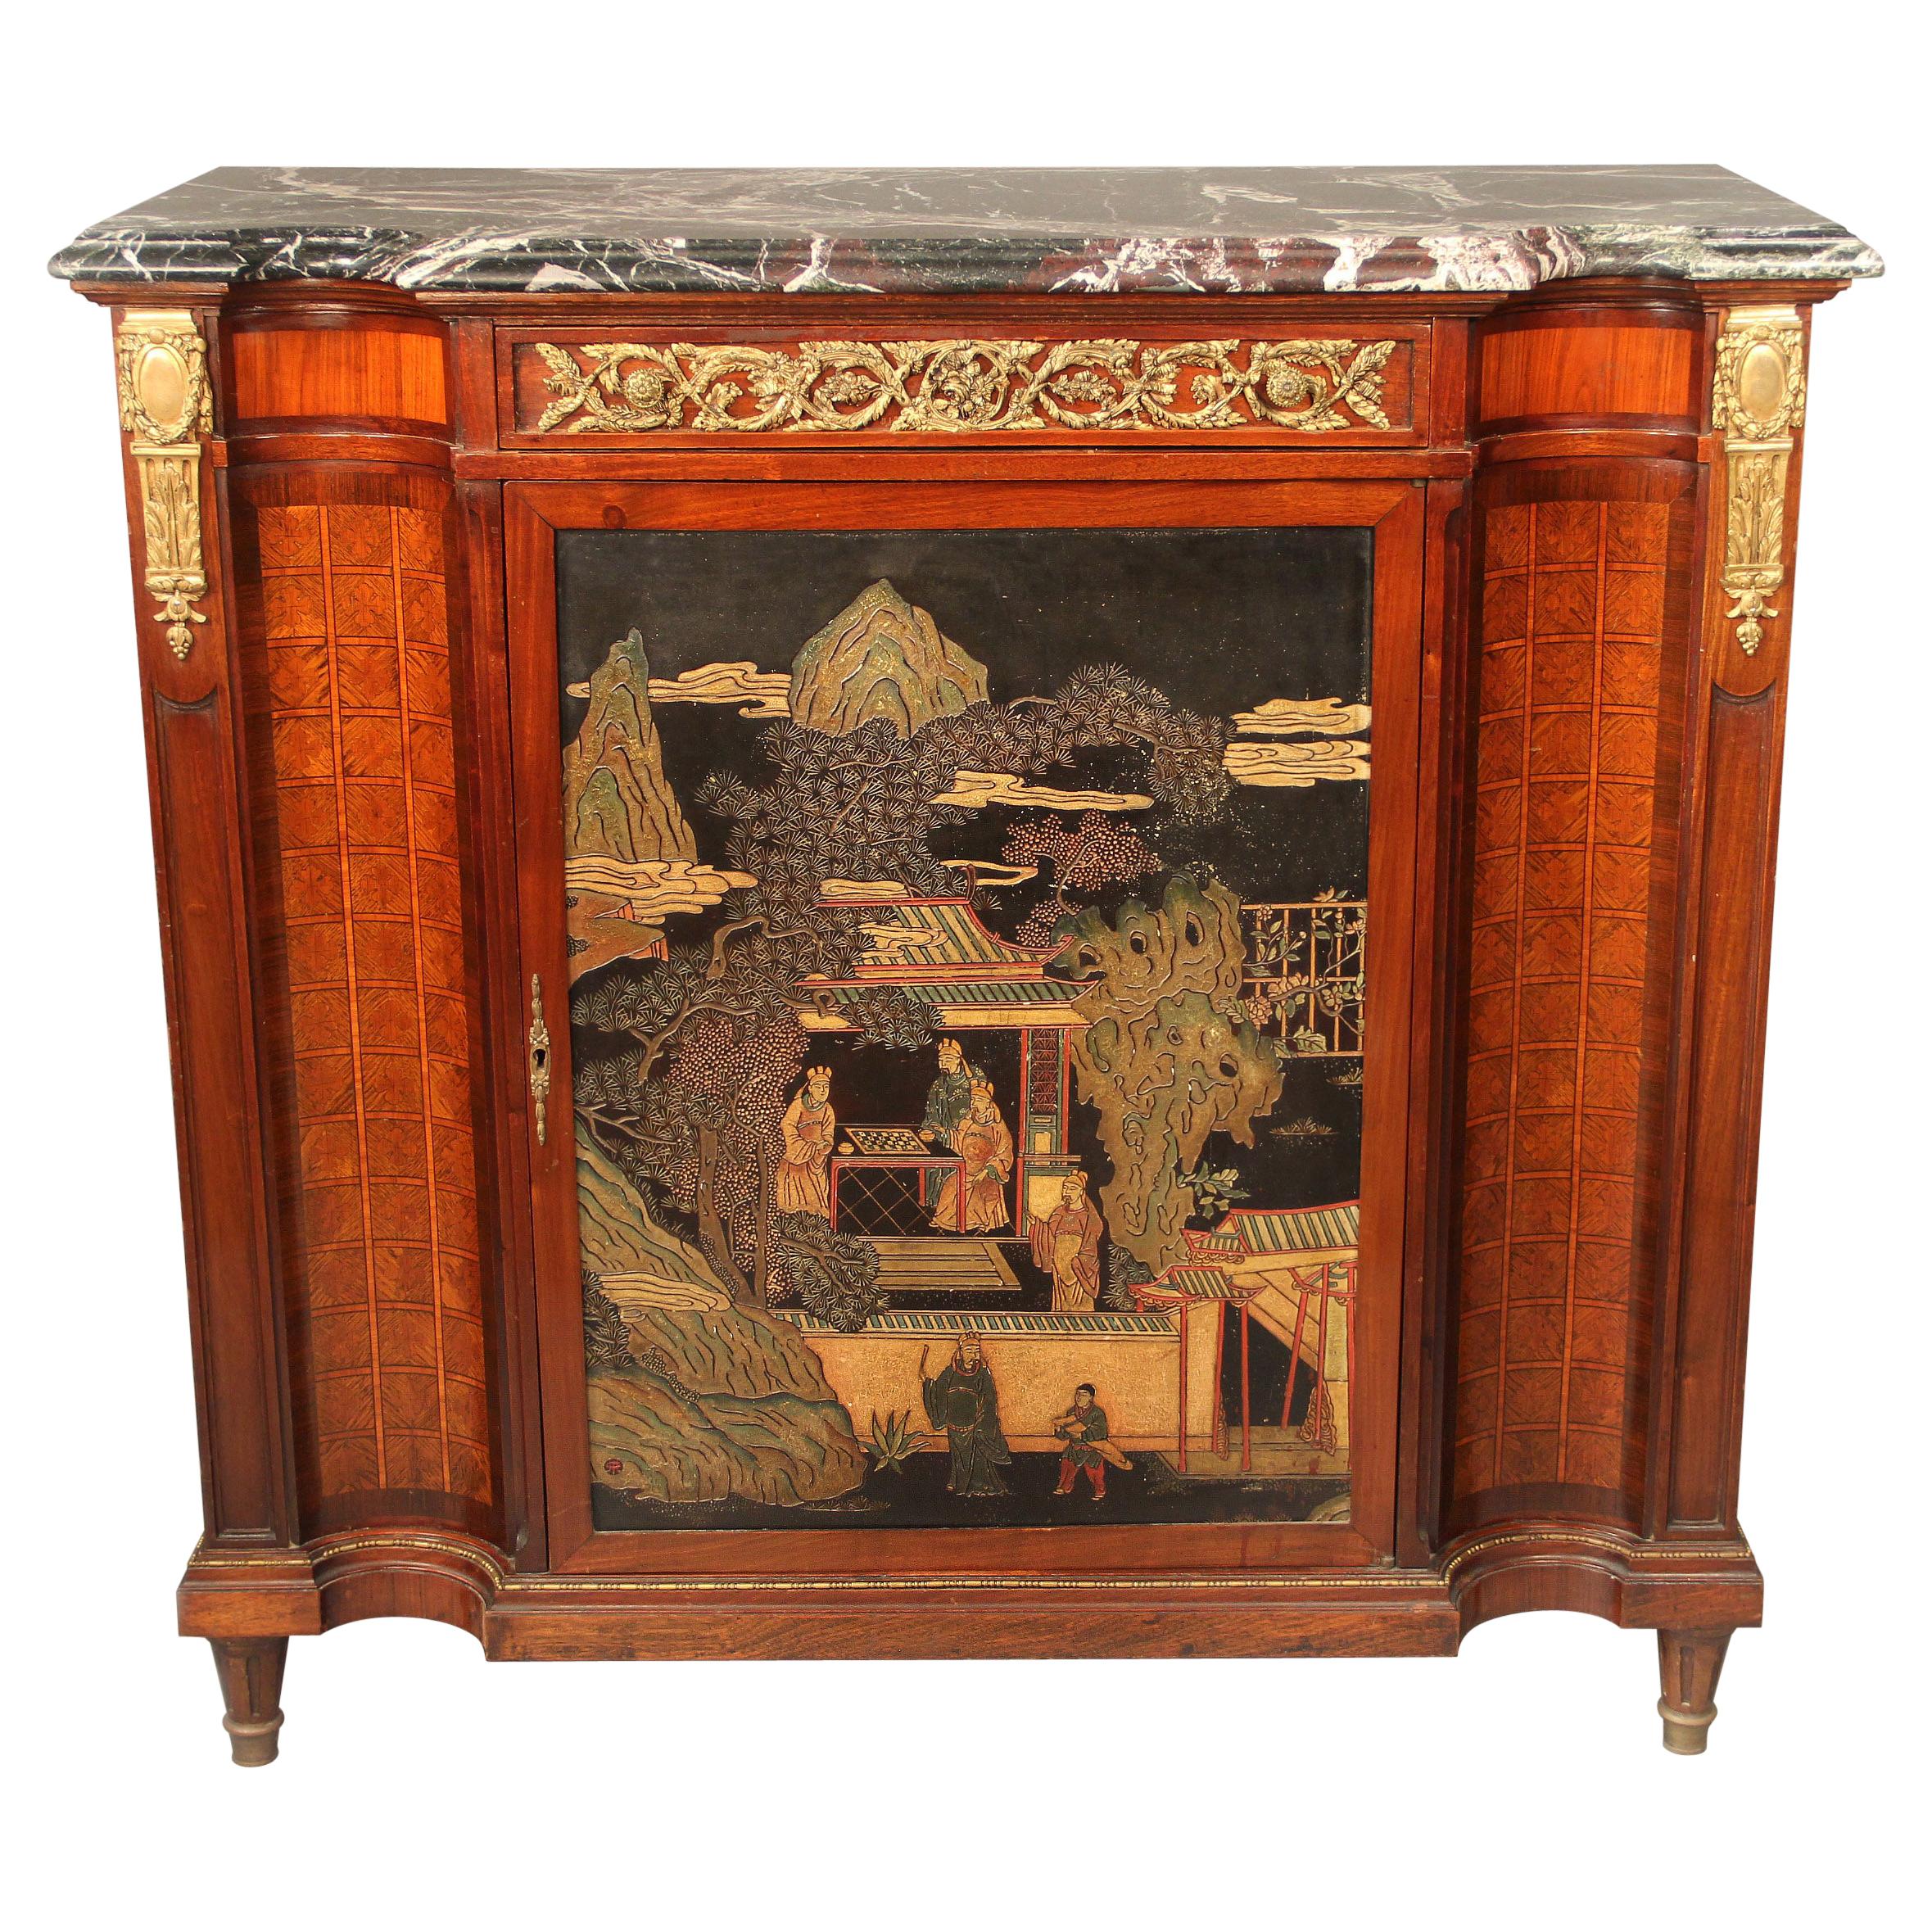 Late 19th Century Gilt Bronze Mounted Louis XVI Style Chinoiserie Cabinet